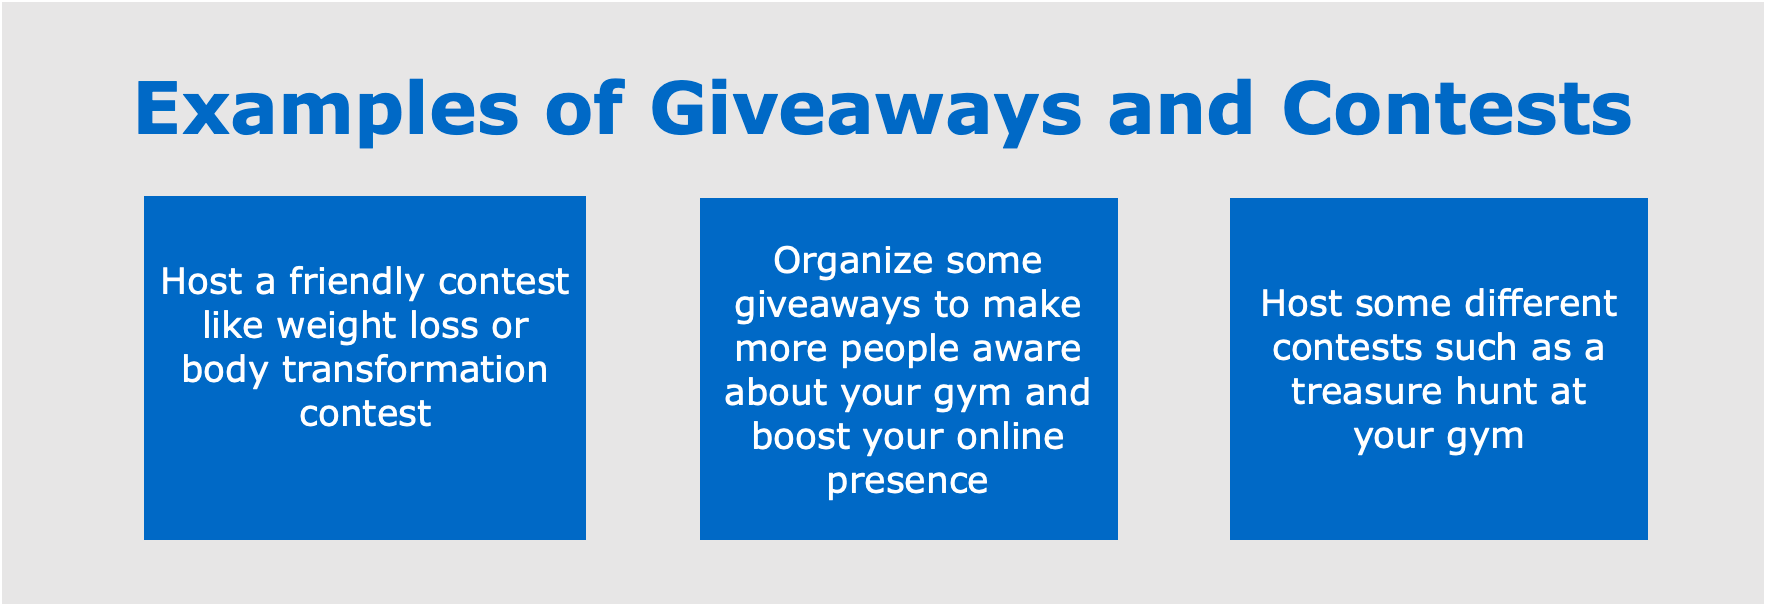 Examples of Giveaways and Contests